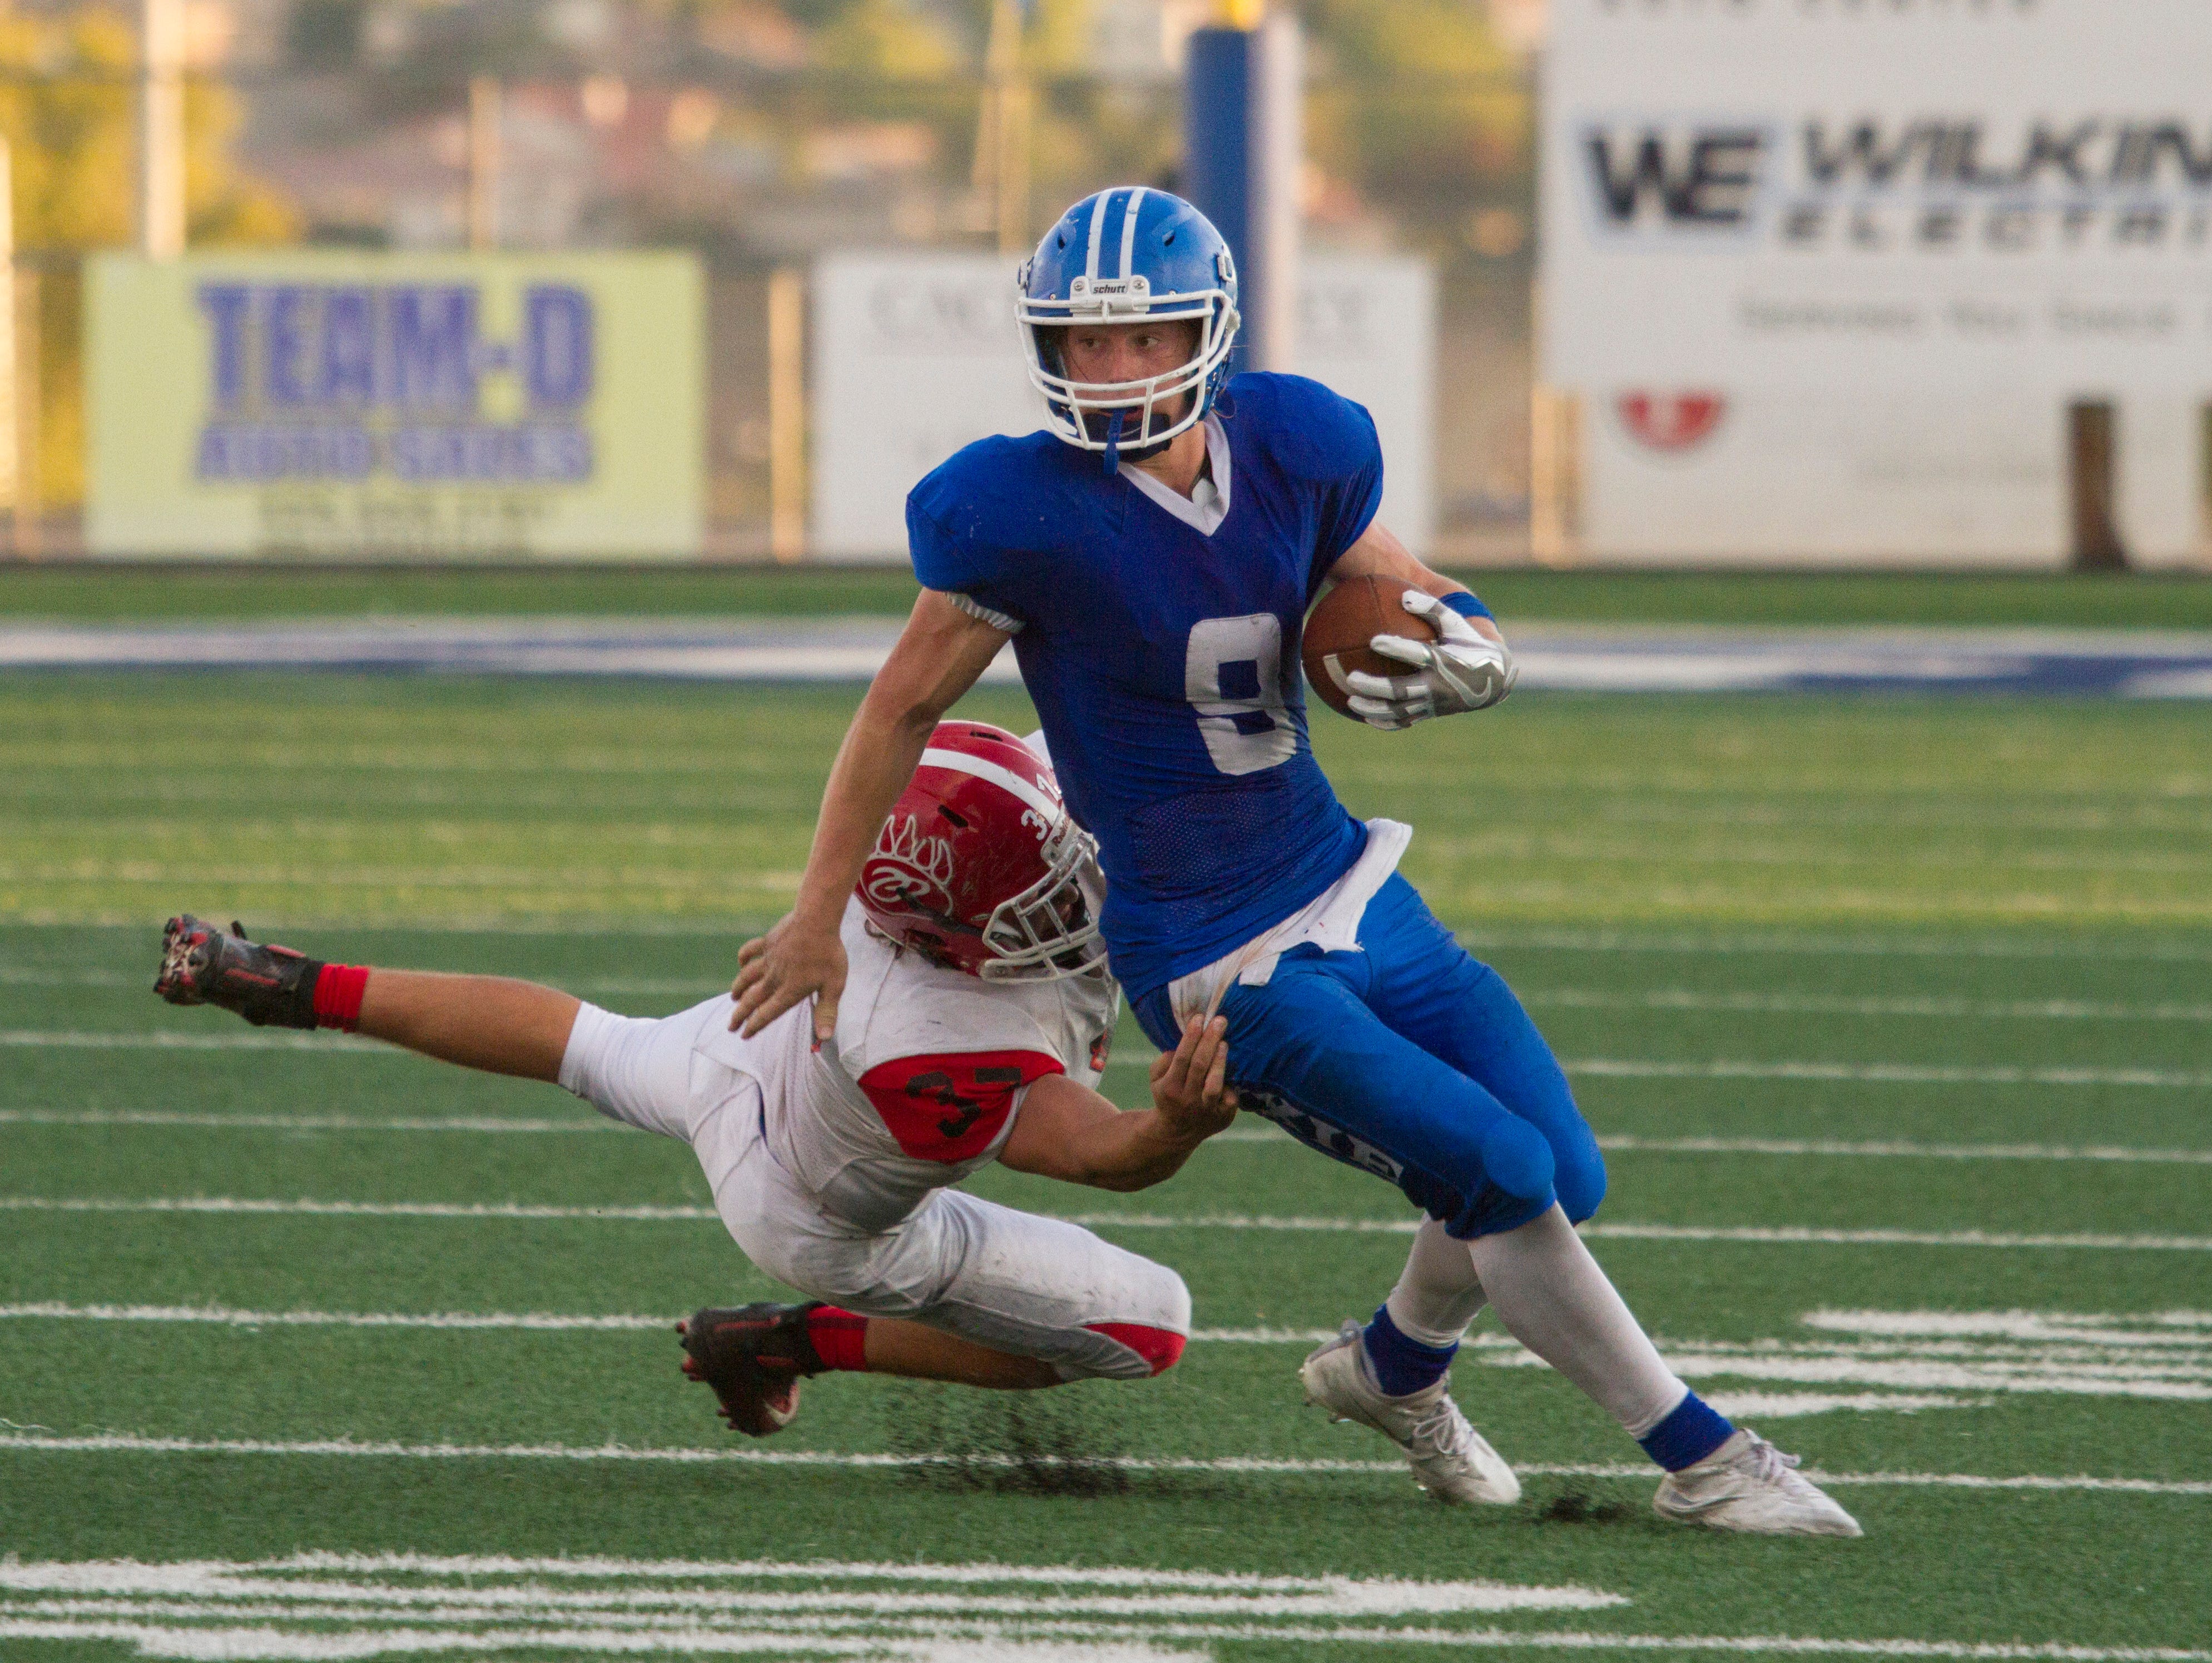 Dixie holds on to 26-25 lead for victory over Bear River Friday, Nov. 4, 2016.